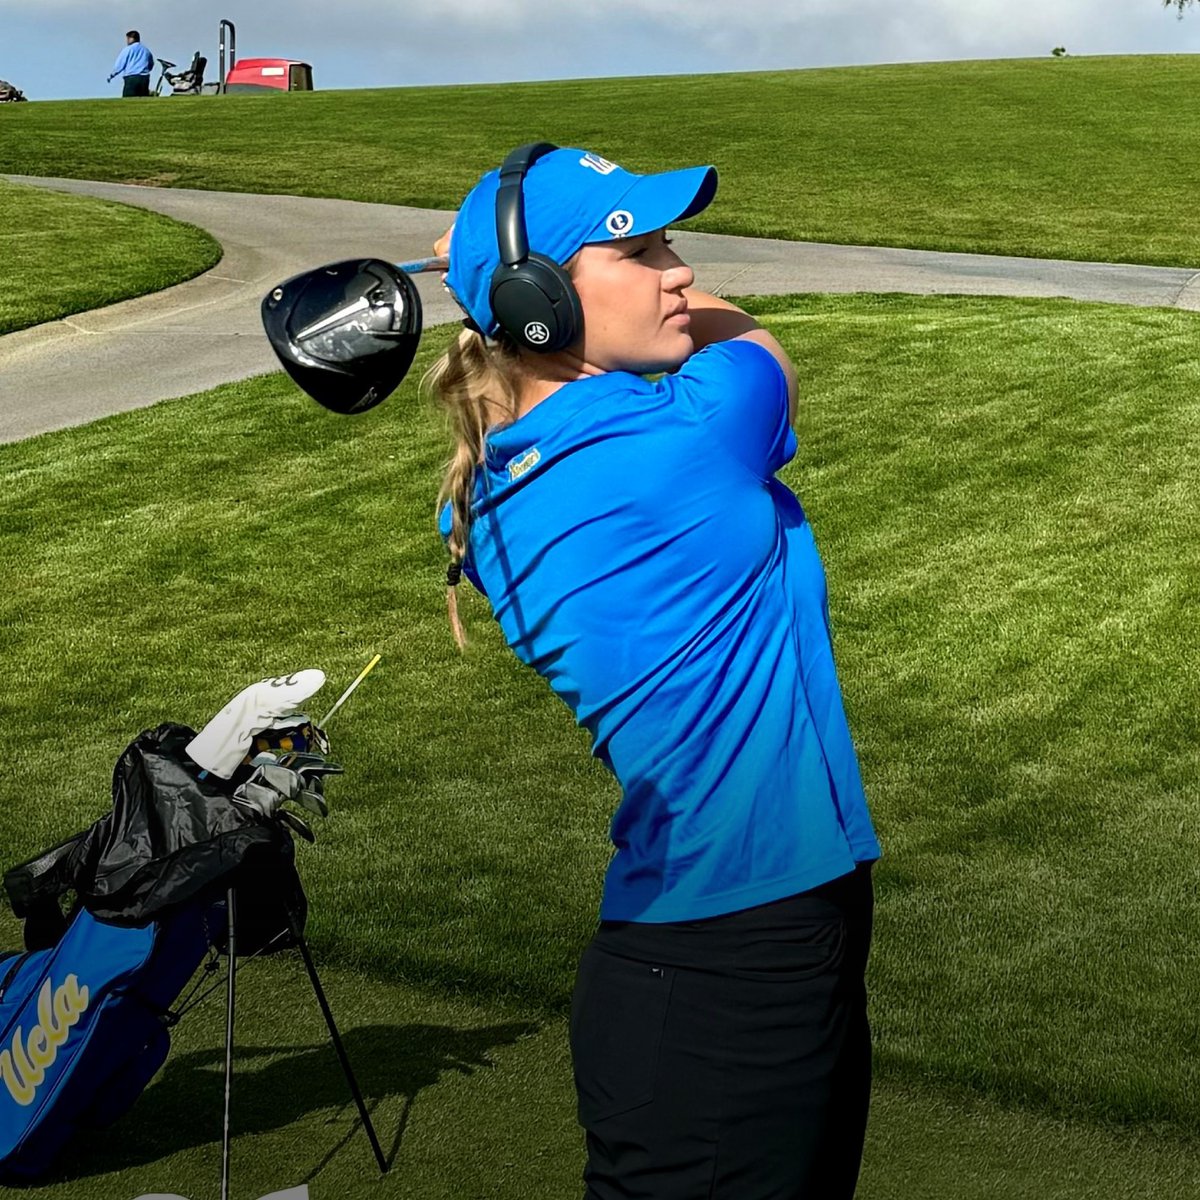 Standout sophomore #MeghanRoyal of #UCLAWomensGolf is now a member of #TeamJLab! #UCLAGolf